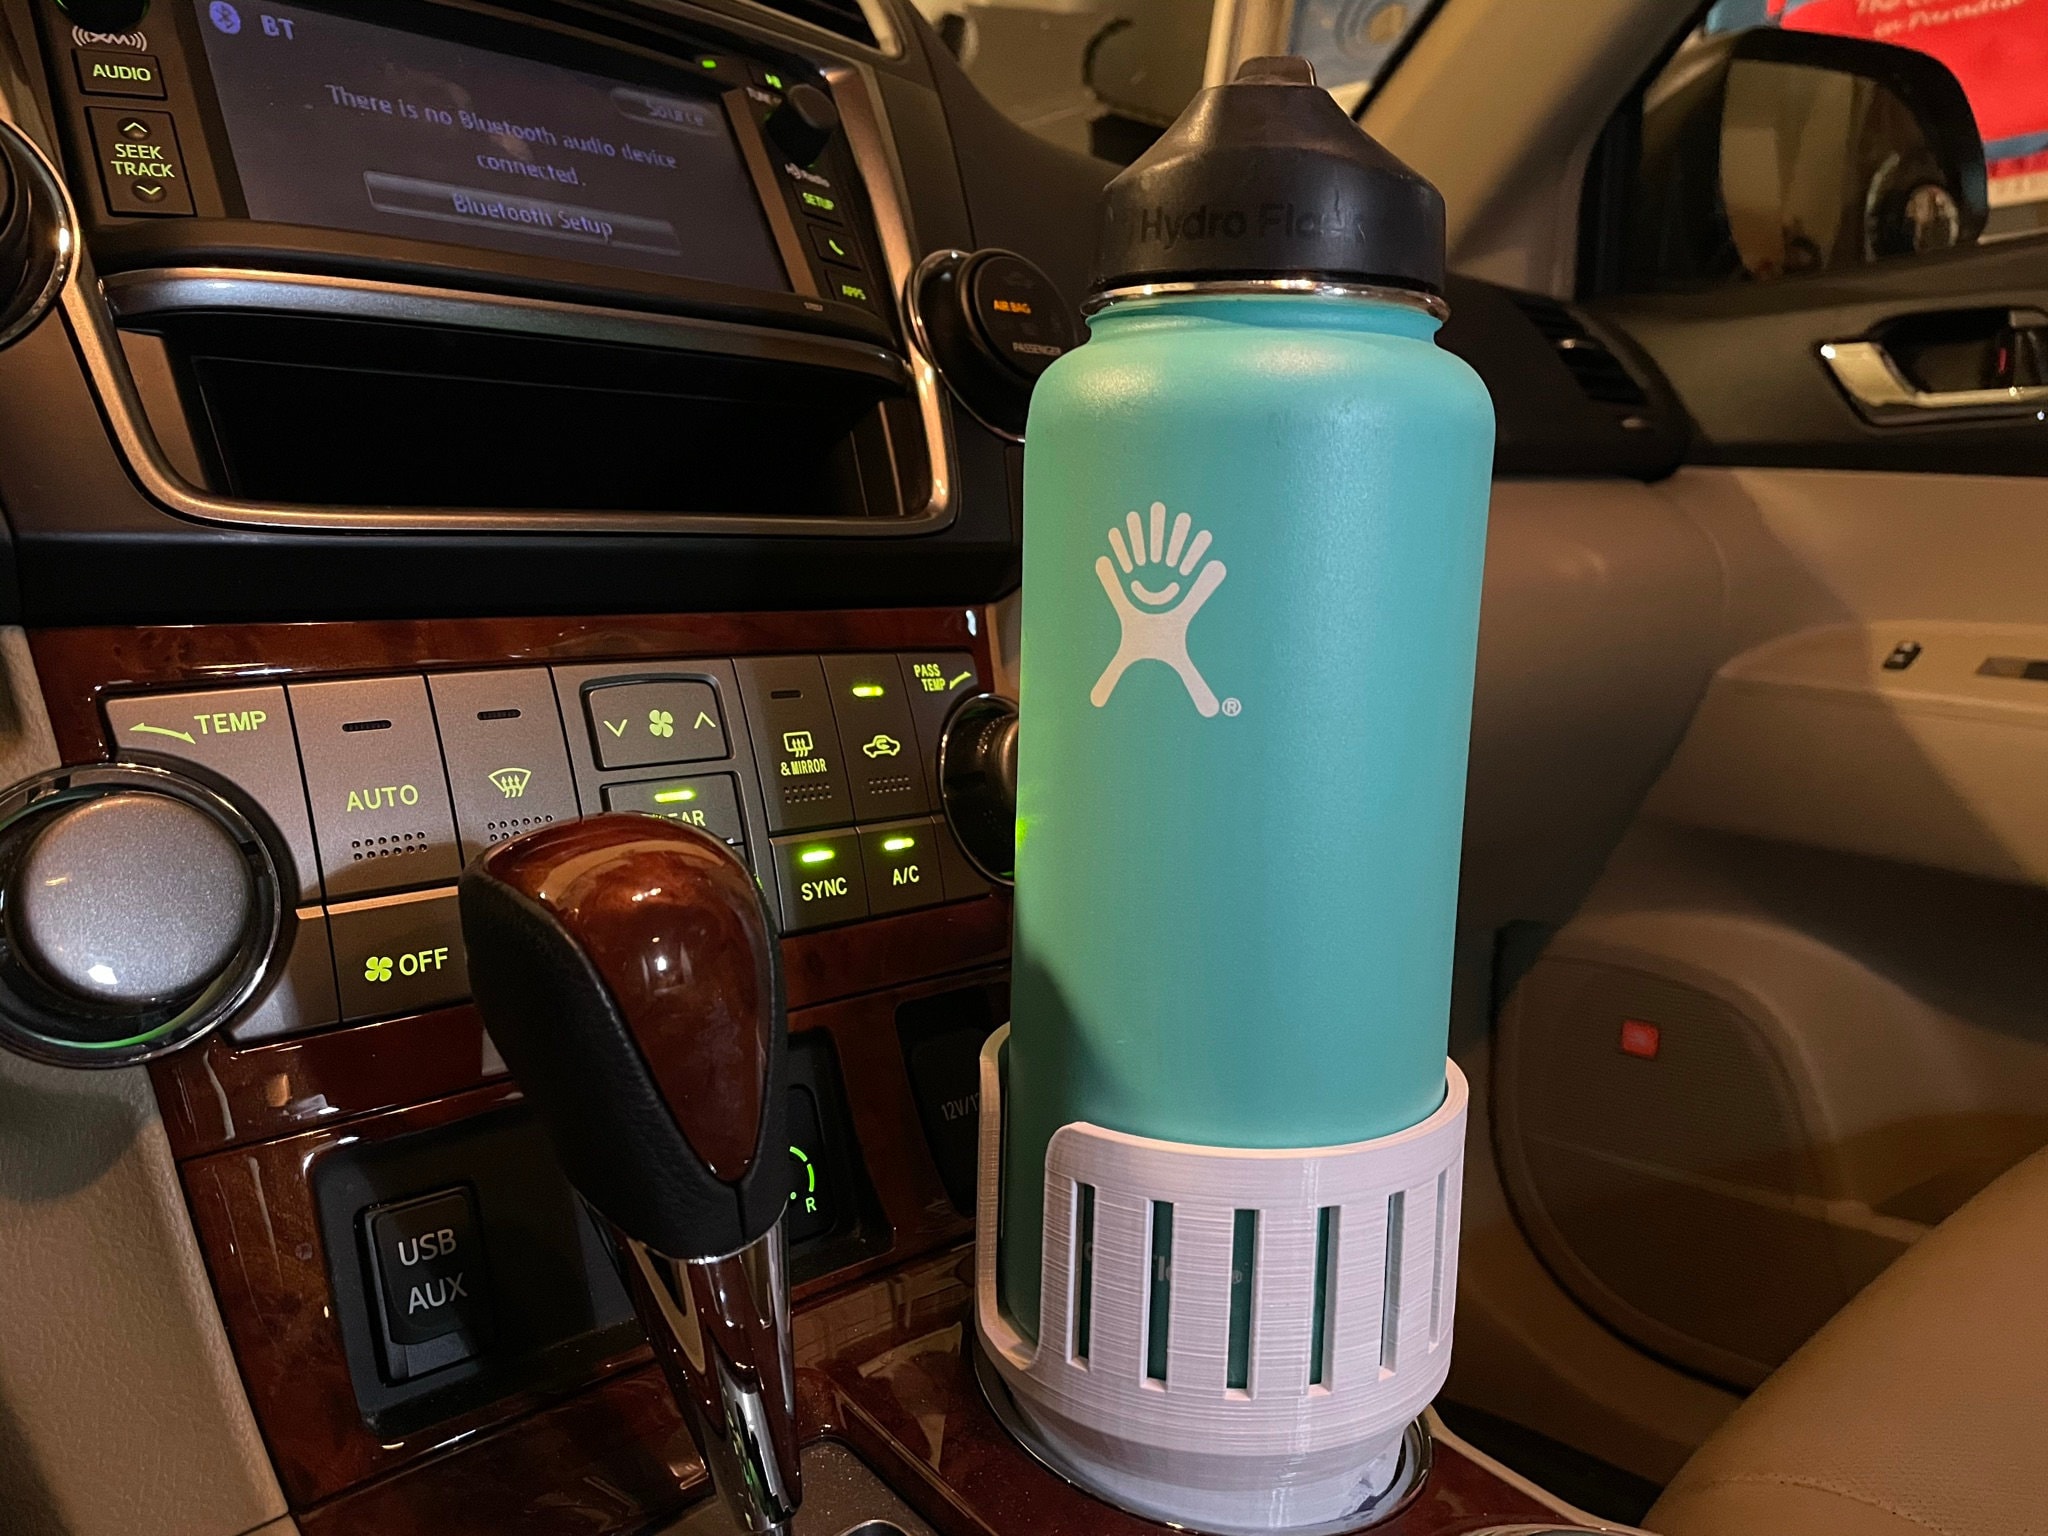 This 32 oz fits in the cup holder : r/Hydroflask